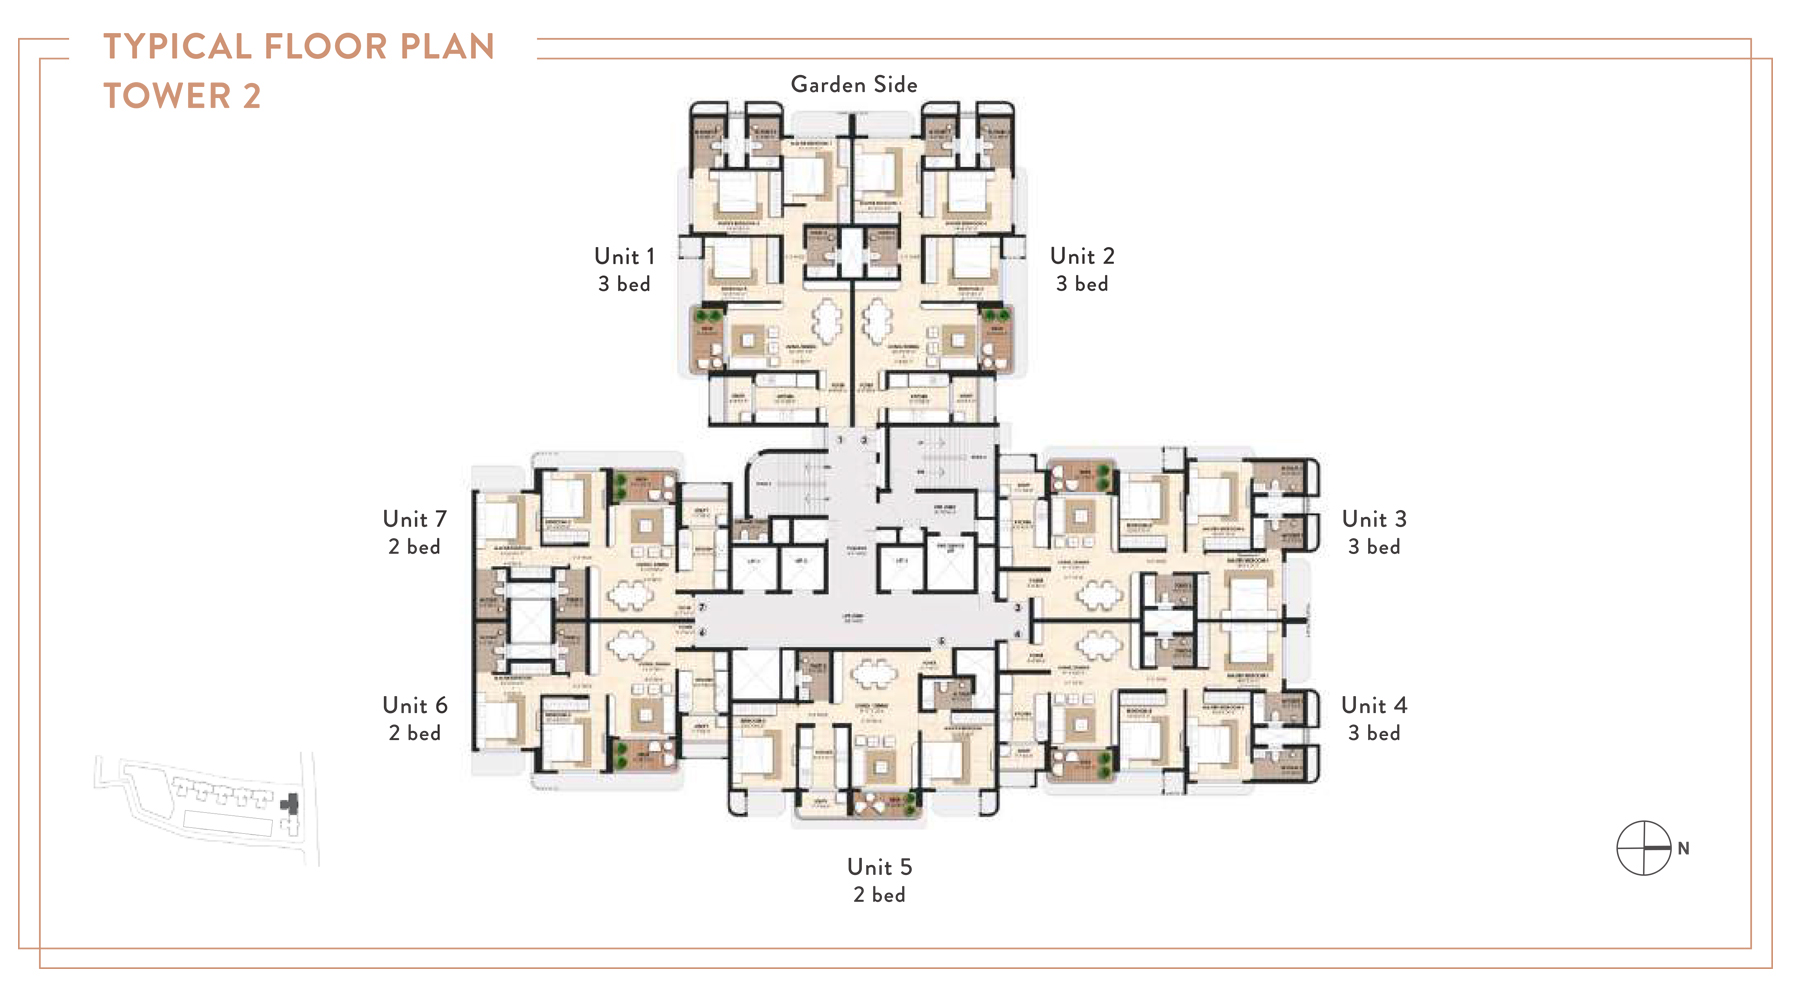 Typical Floor Plan, Tower 2